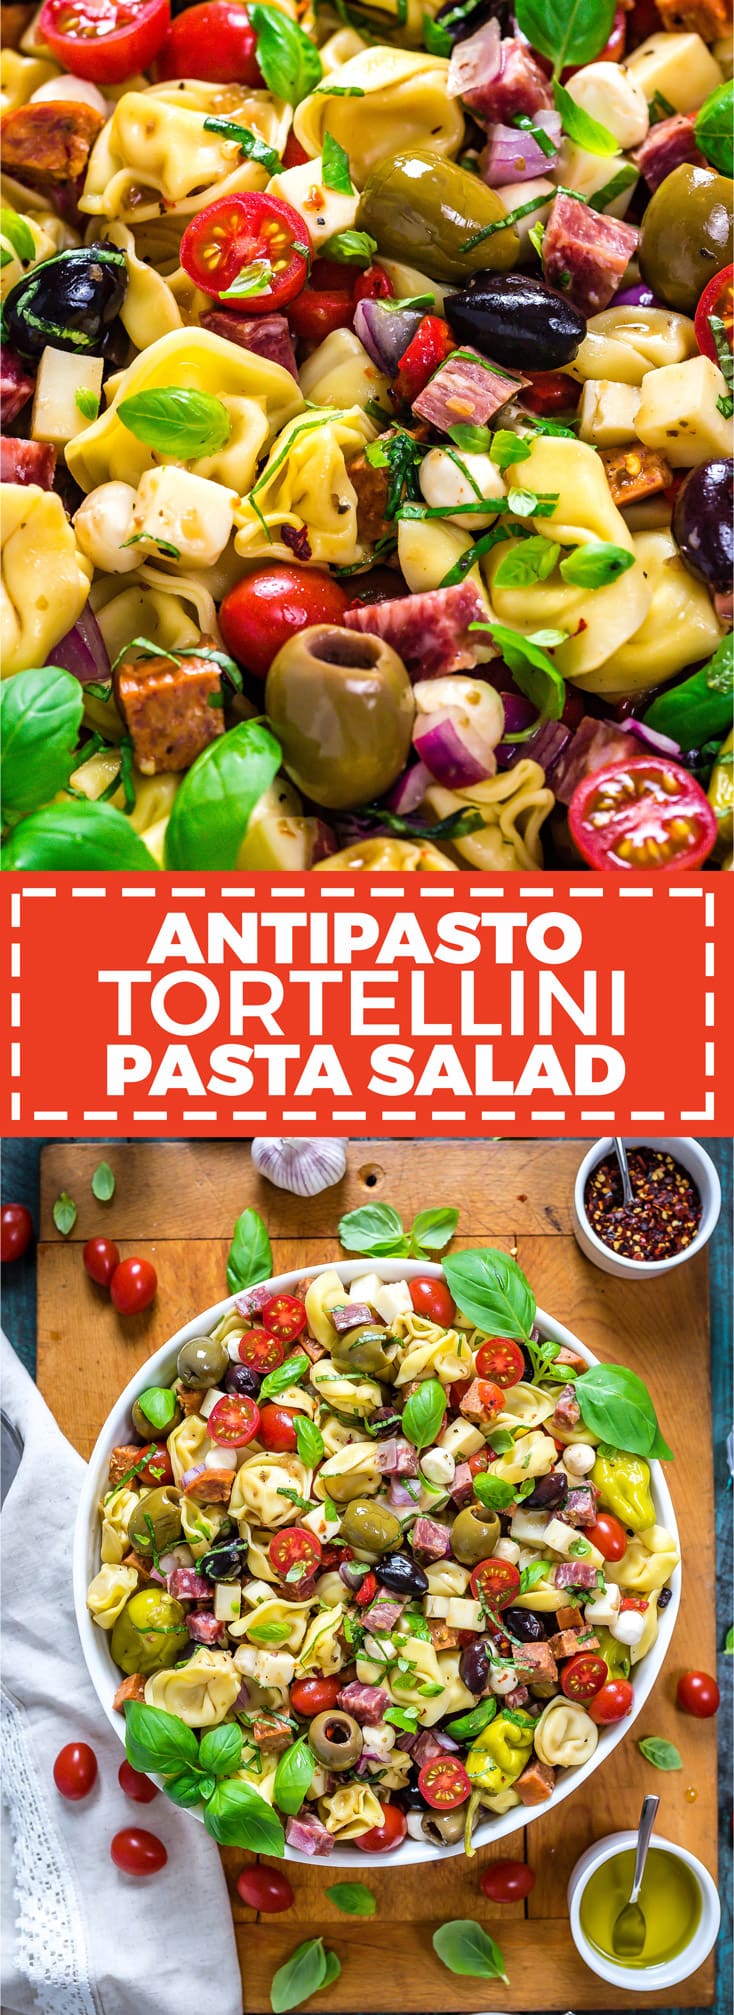 Antipasto Tortellini Pasta Salad. This packed potluck favorite includes multiple cheeses, meats, olives, peppers, and more to create a hearty Italian-inspired summer side dish. | hostthetoast.com